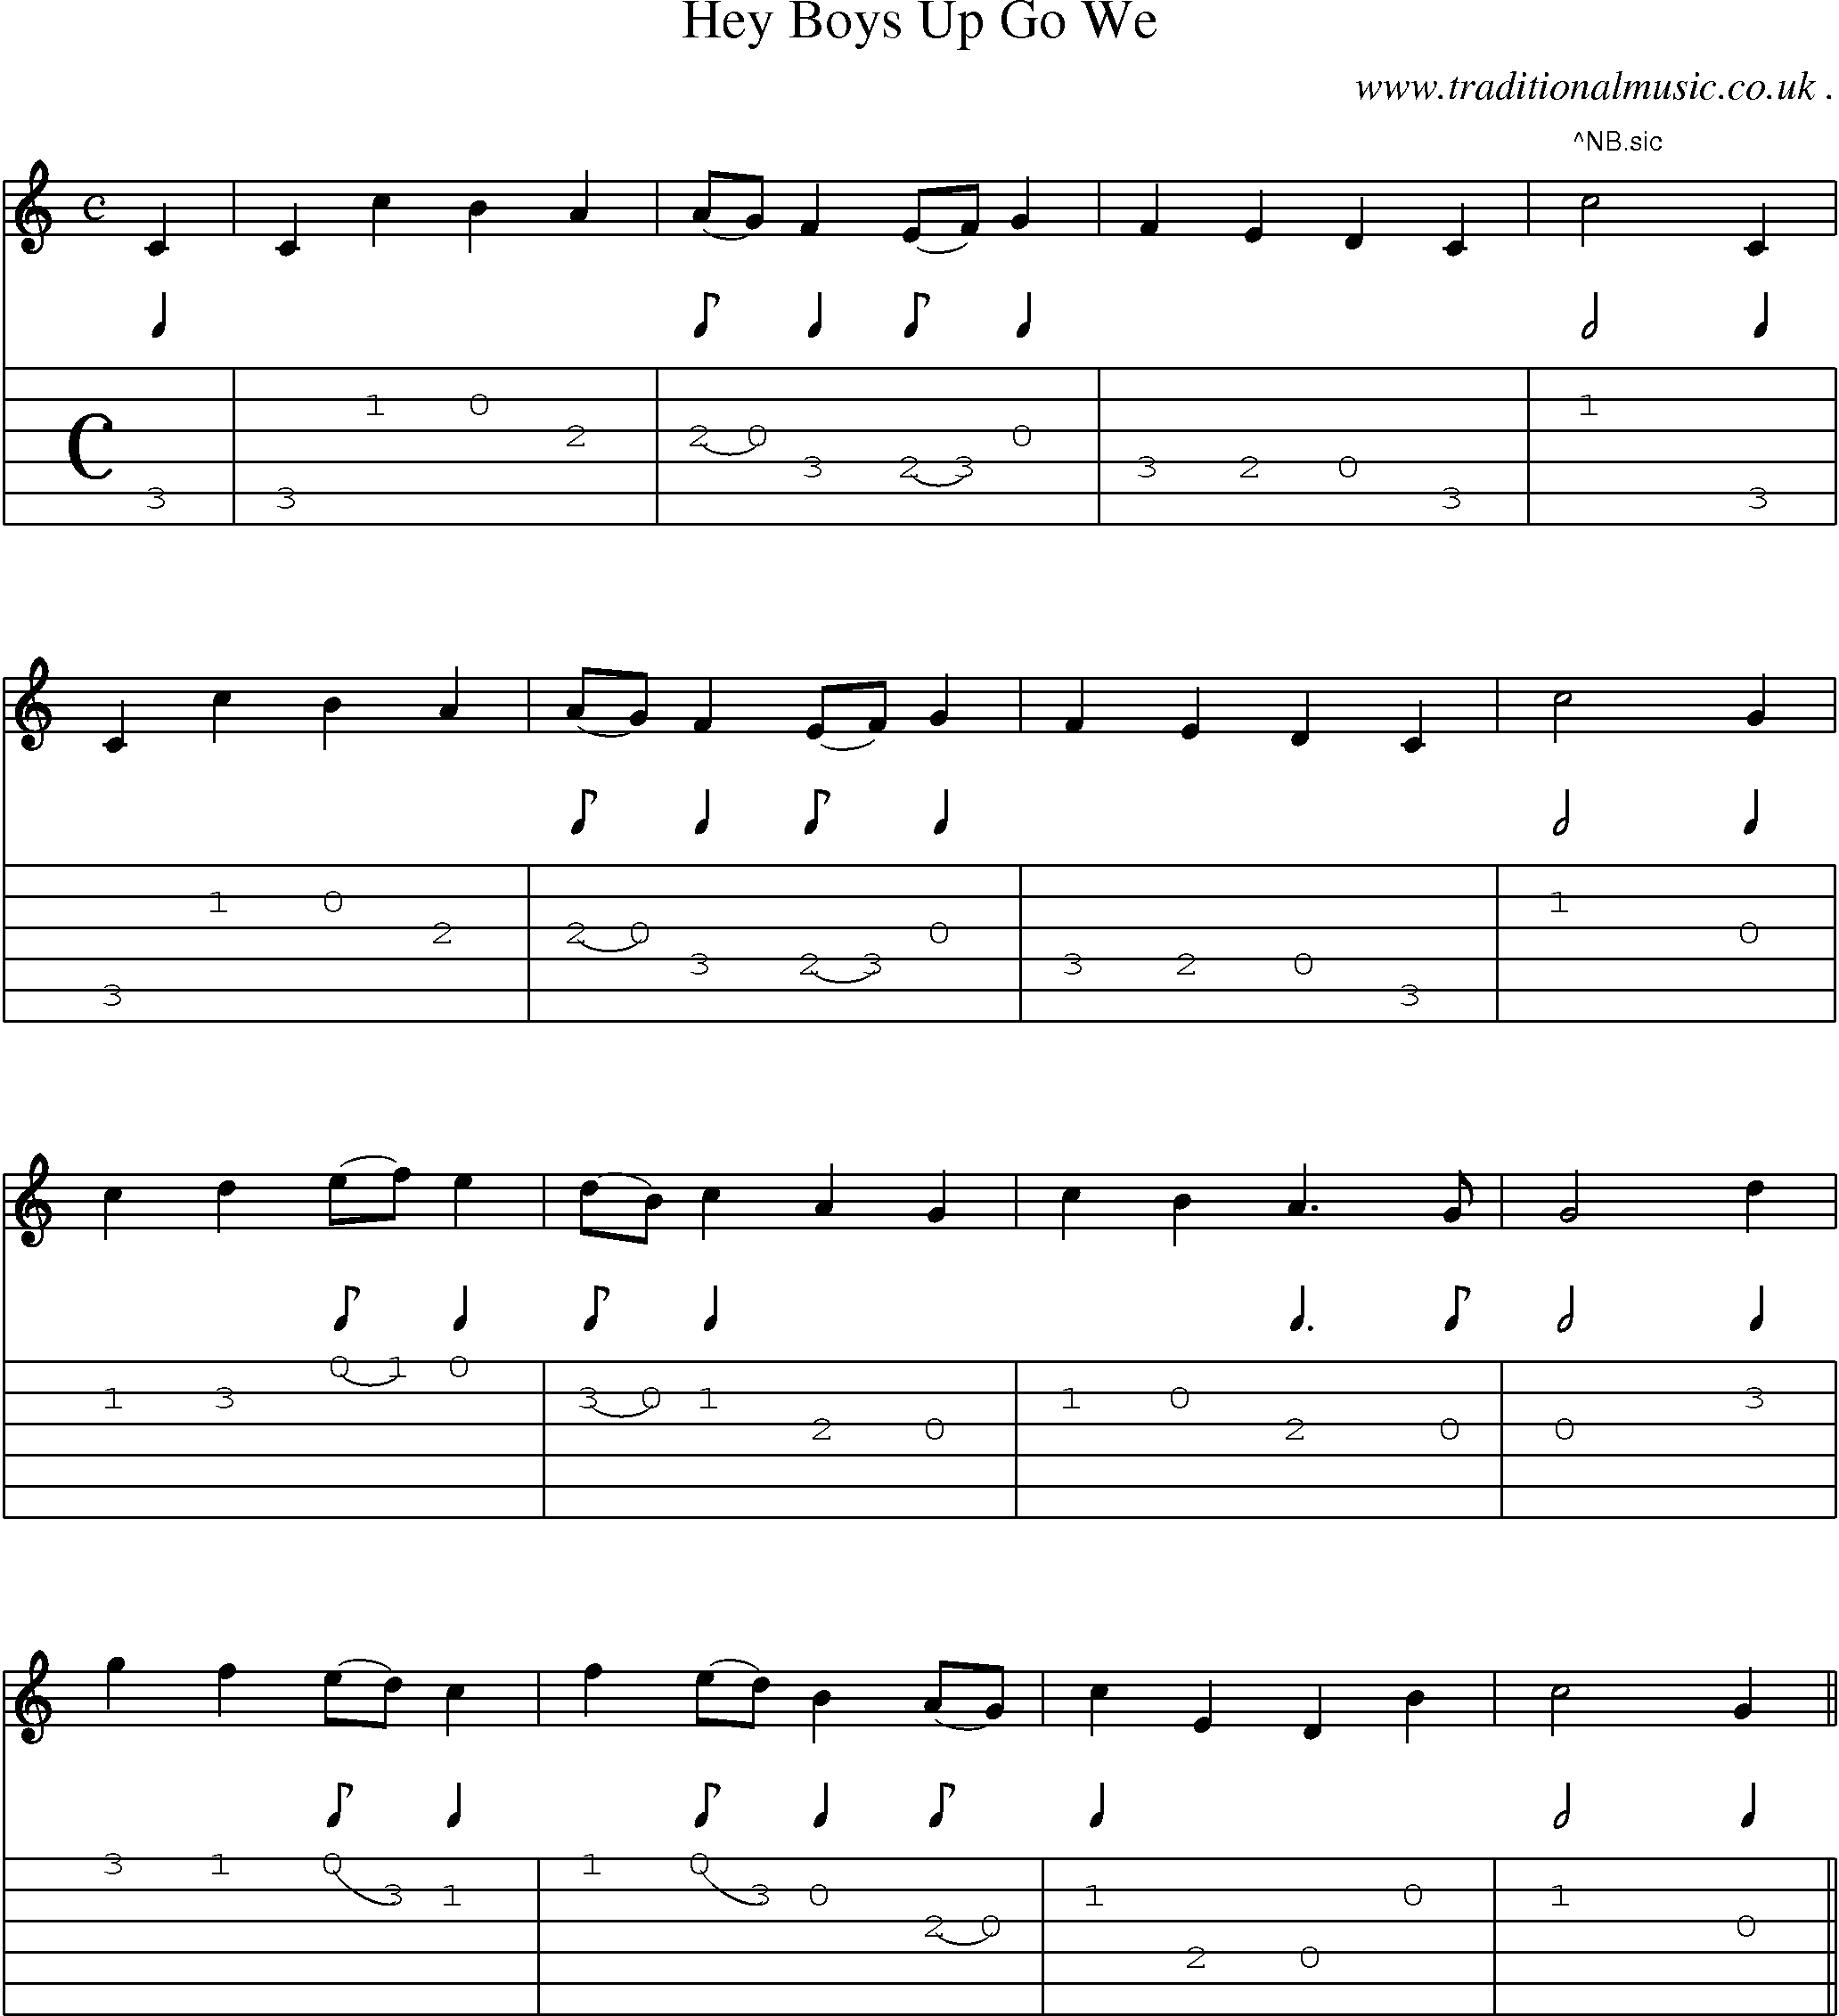 Sheet-Music and Guitar Tabs for Hey Boys Up Go We